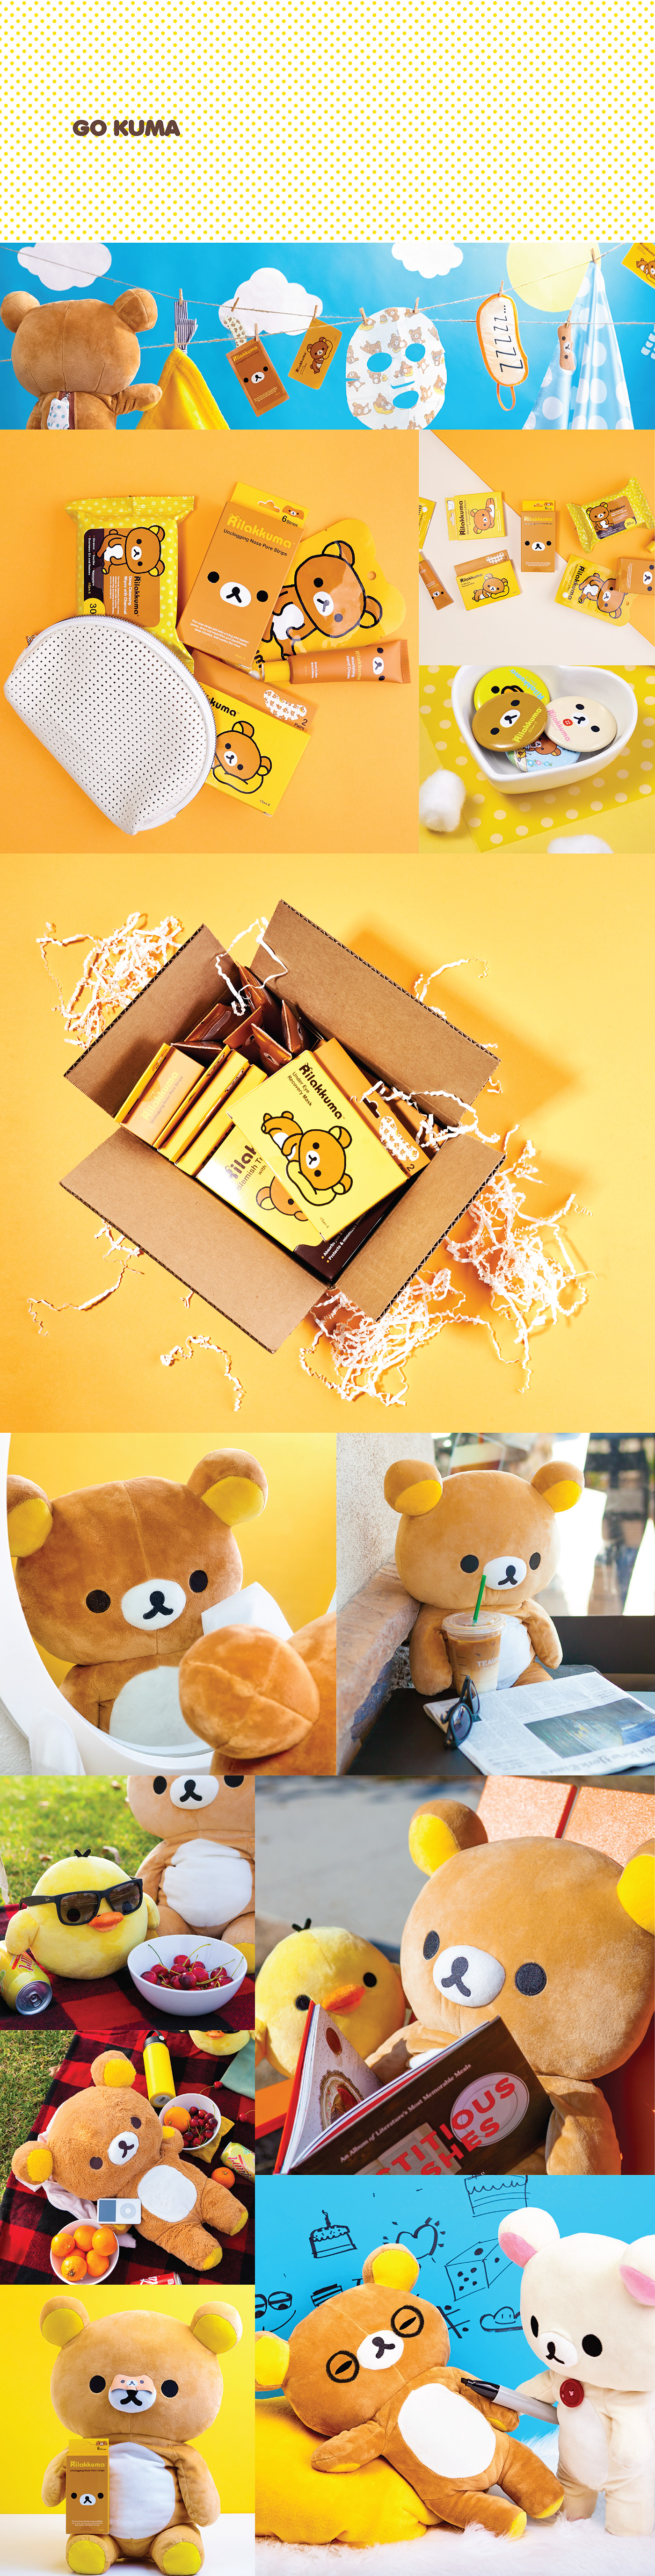 rilakkuma graphic design  Photography  Packaging japan usa skincare cosmetic products yellow